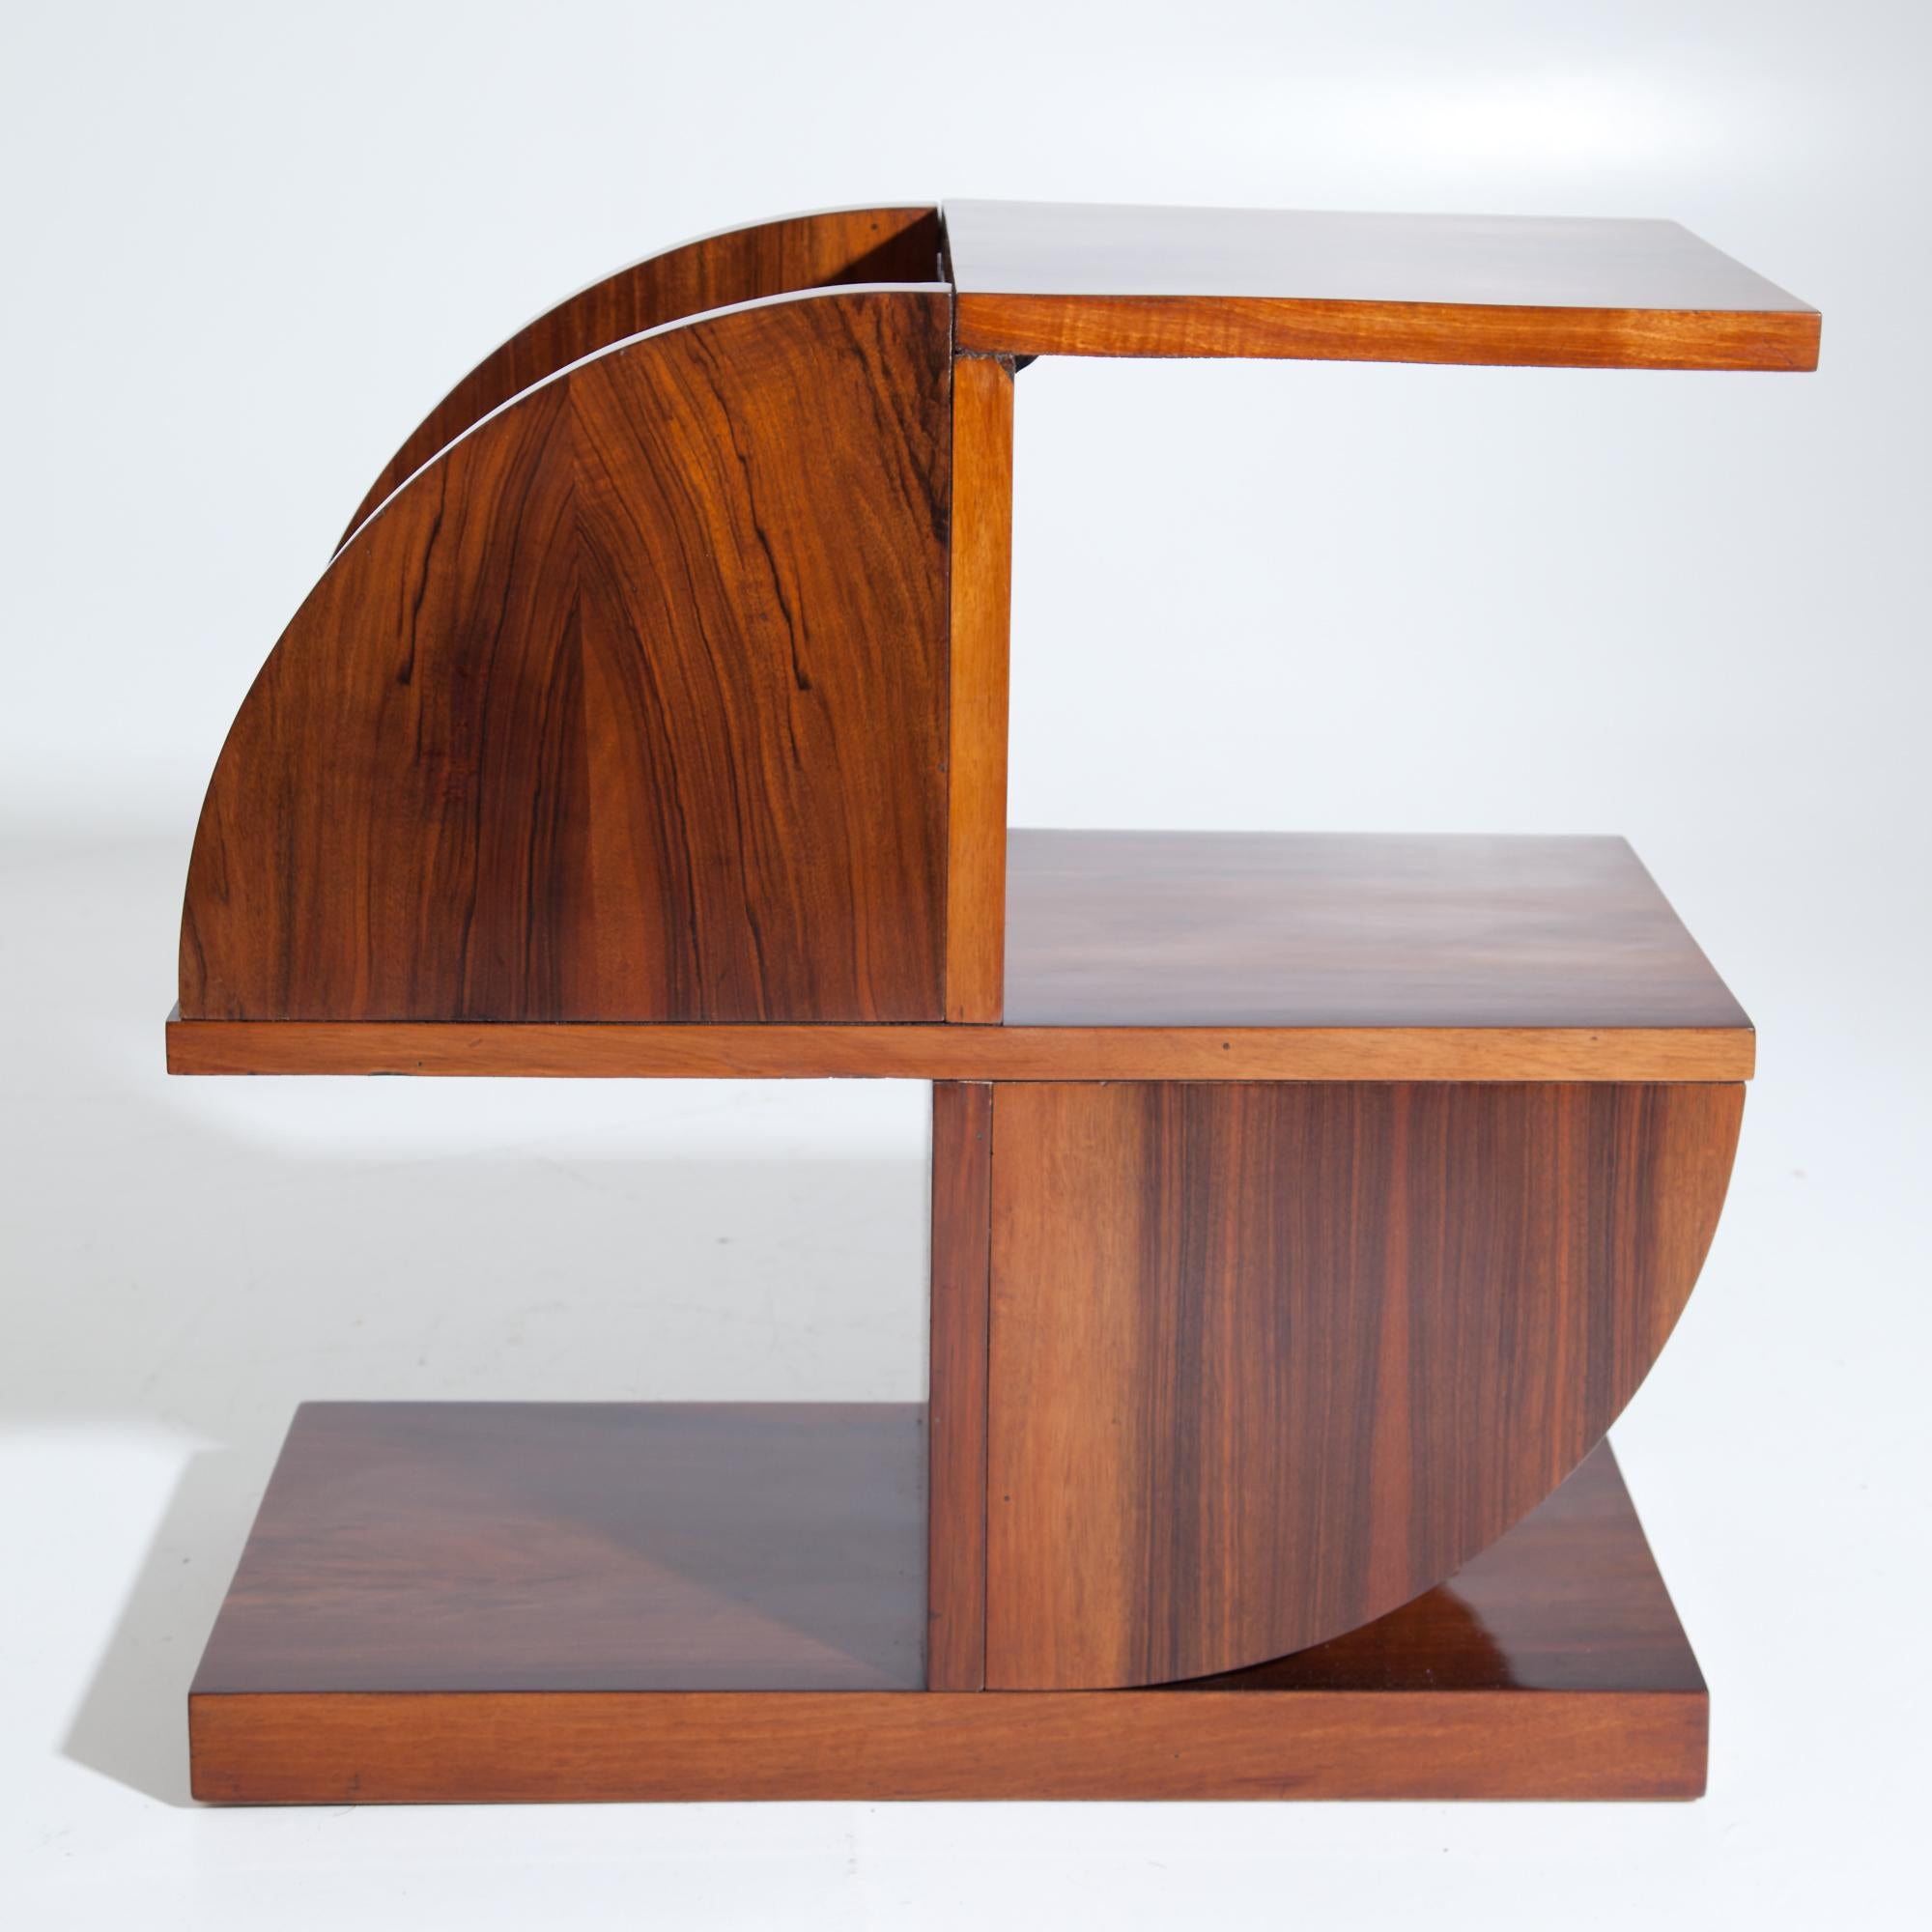 Geometrically designed Art Deco walnut shelf with three shelves and two compartments surrounded by circular segments.